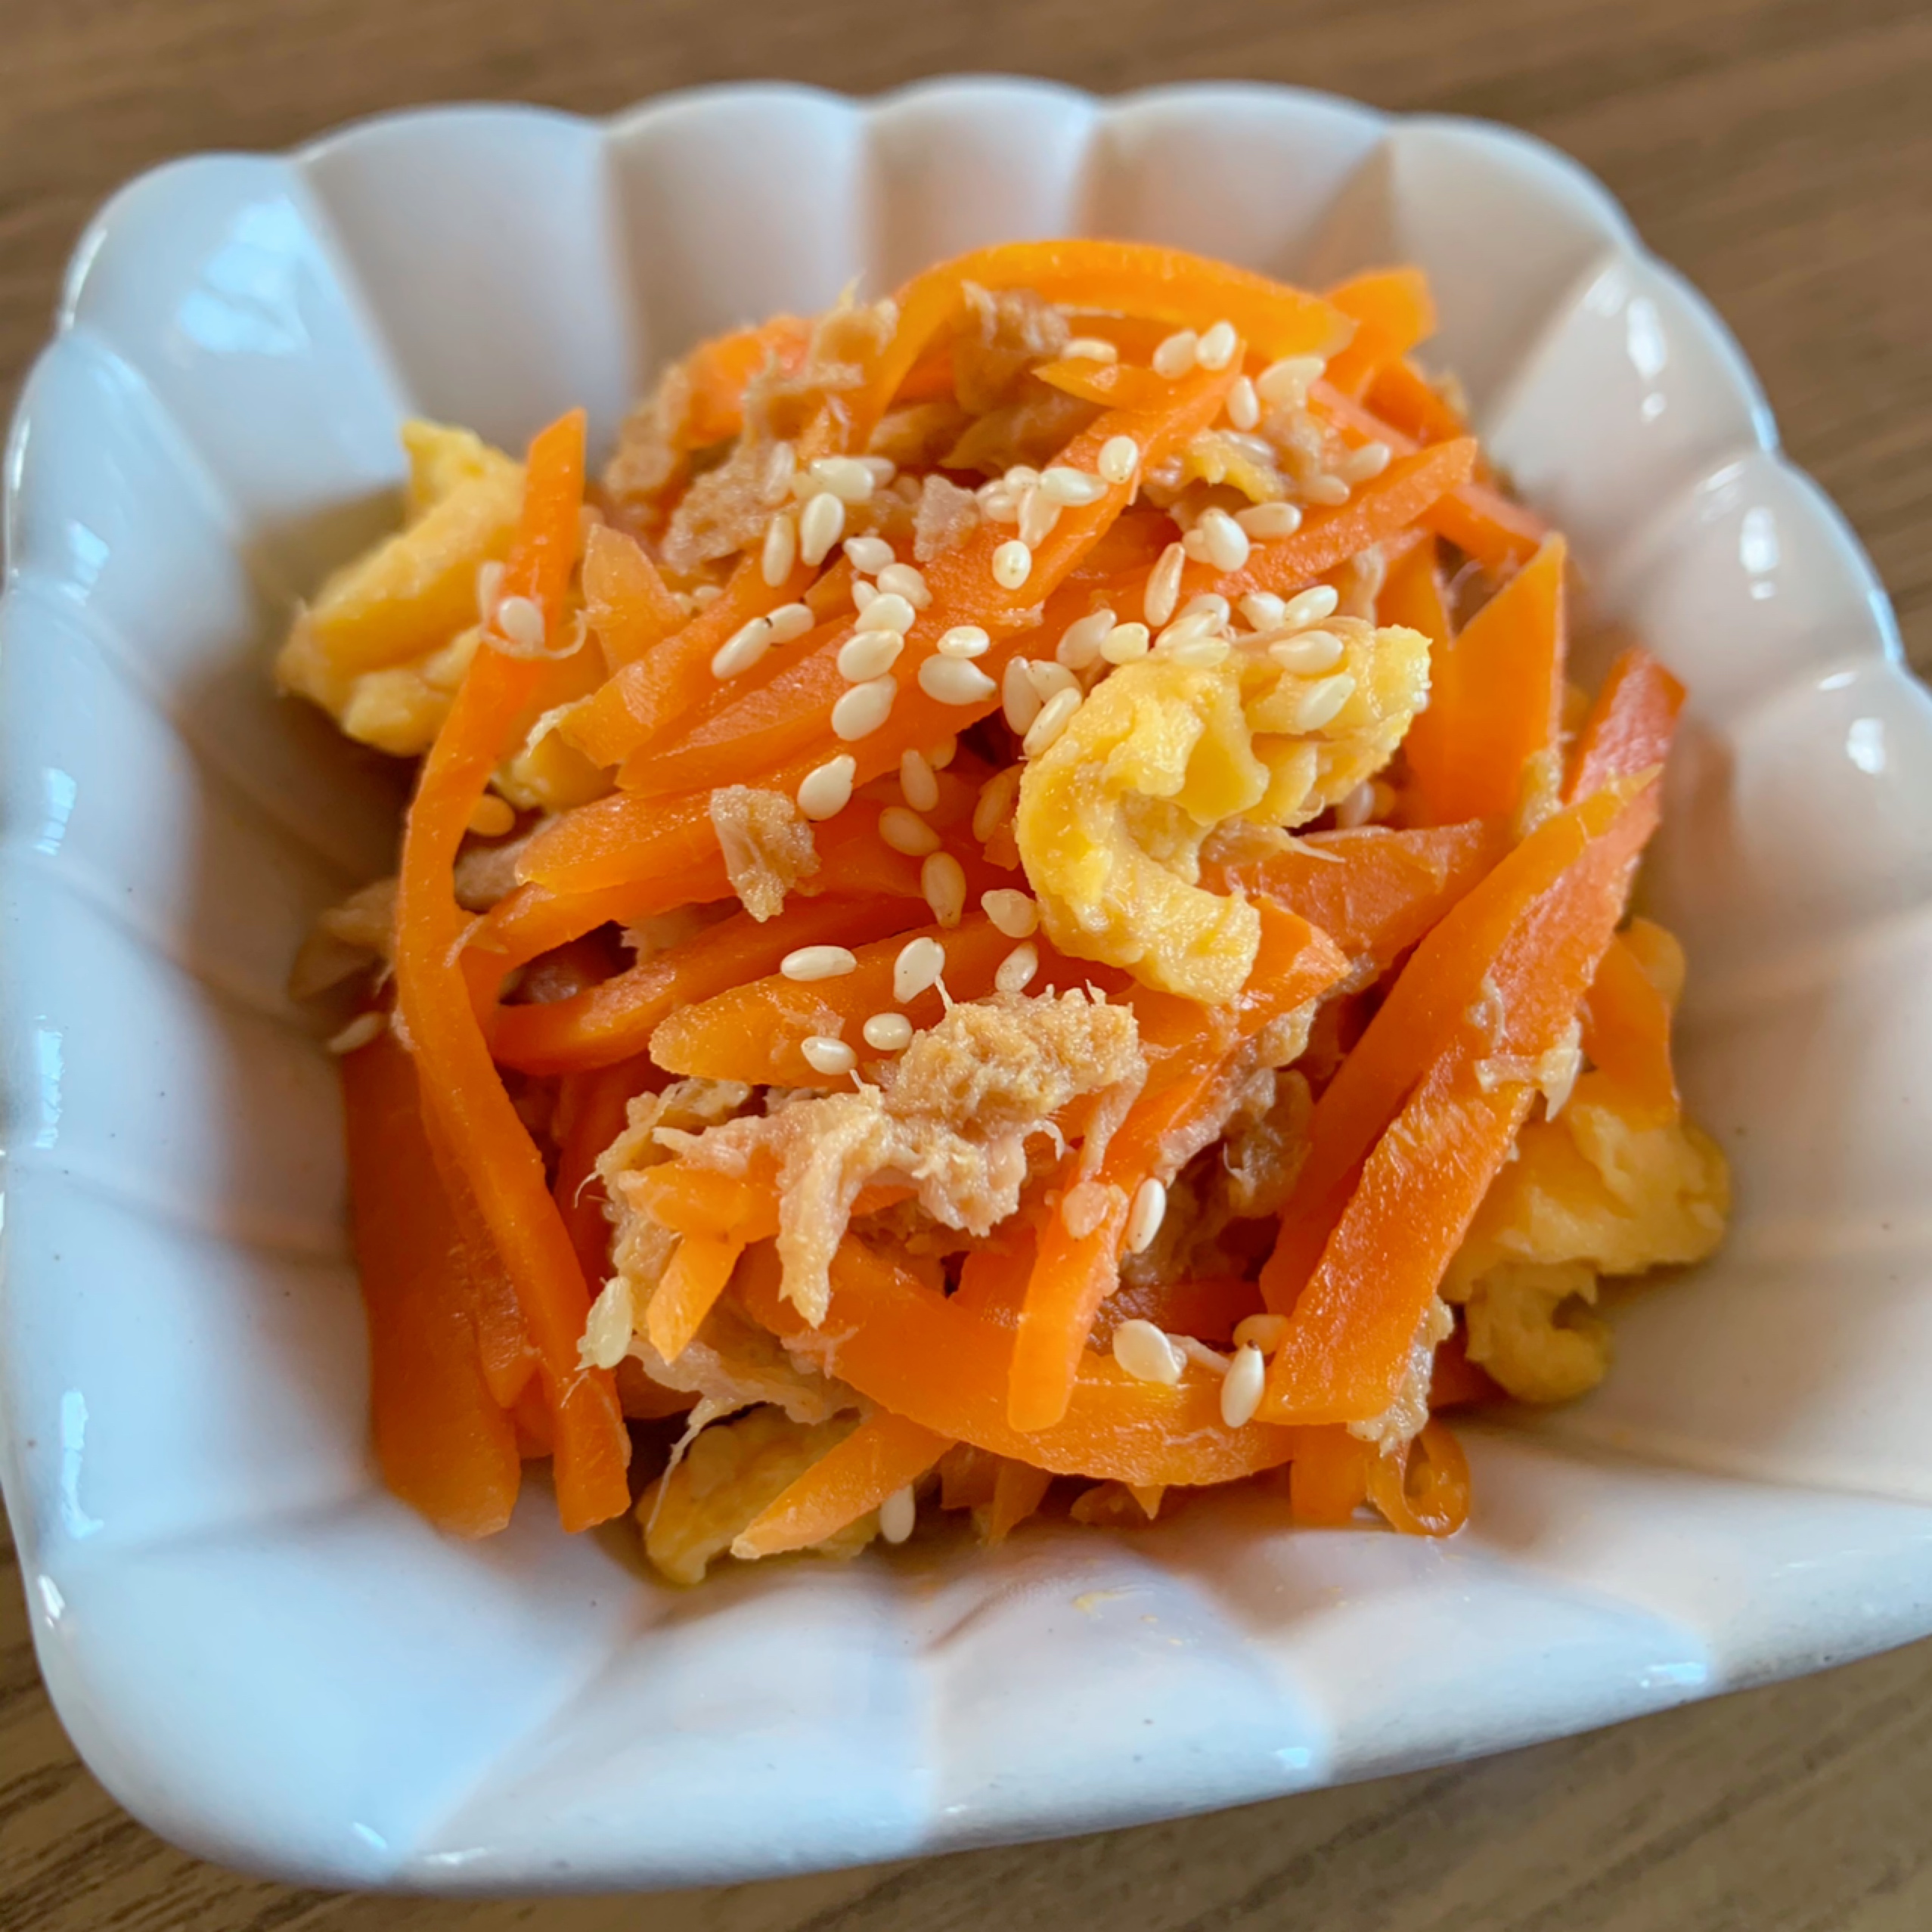 This dish is made by frying thinly sliced carrots and seasoning them with soy sauce.